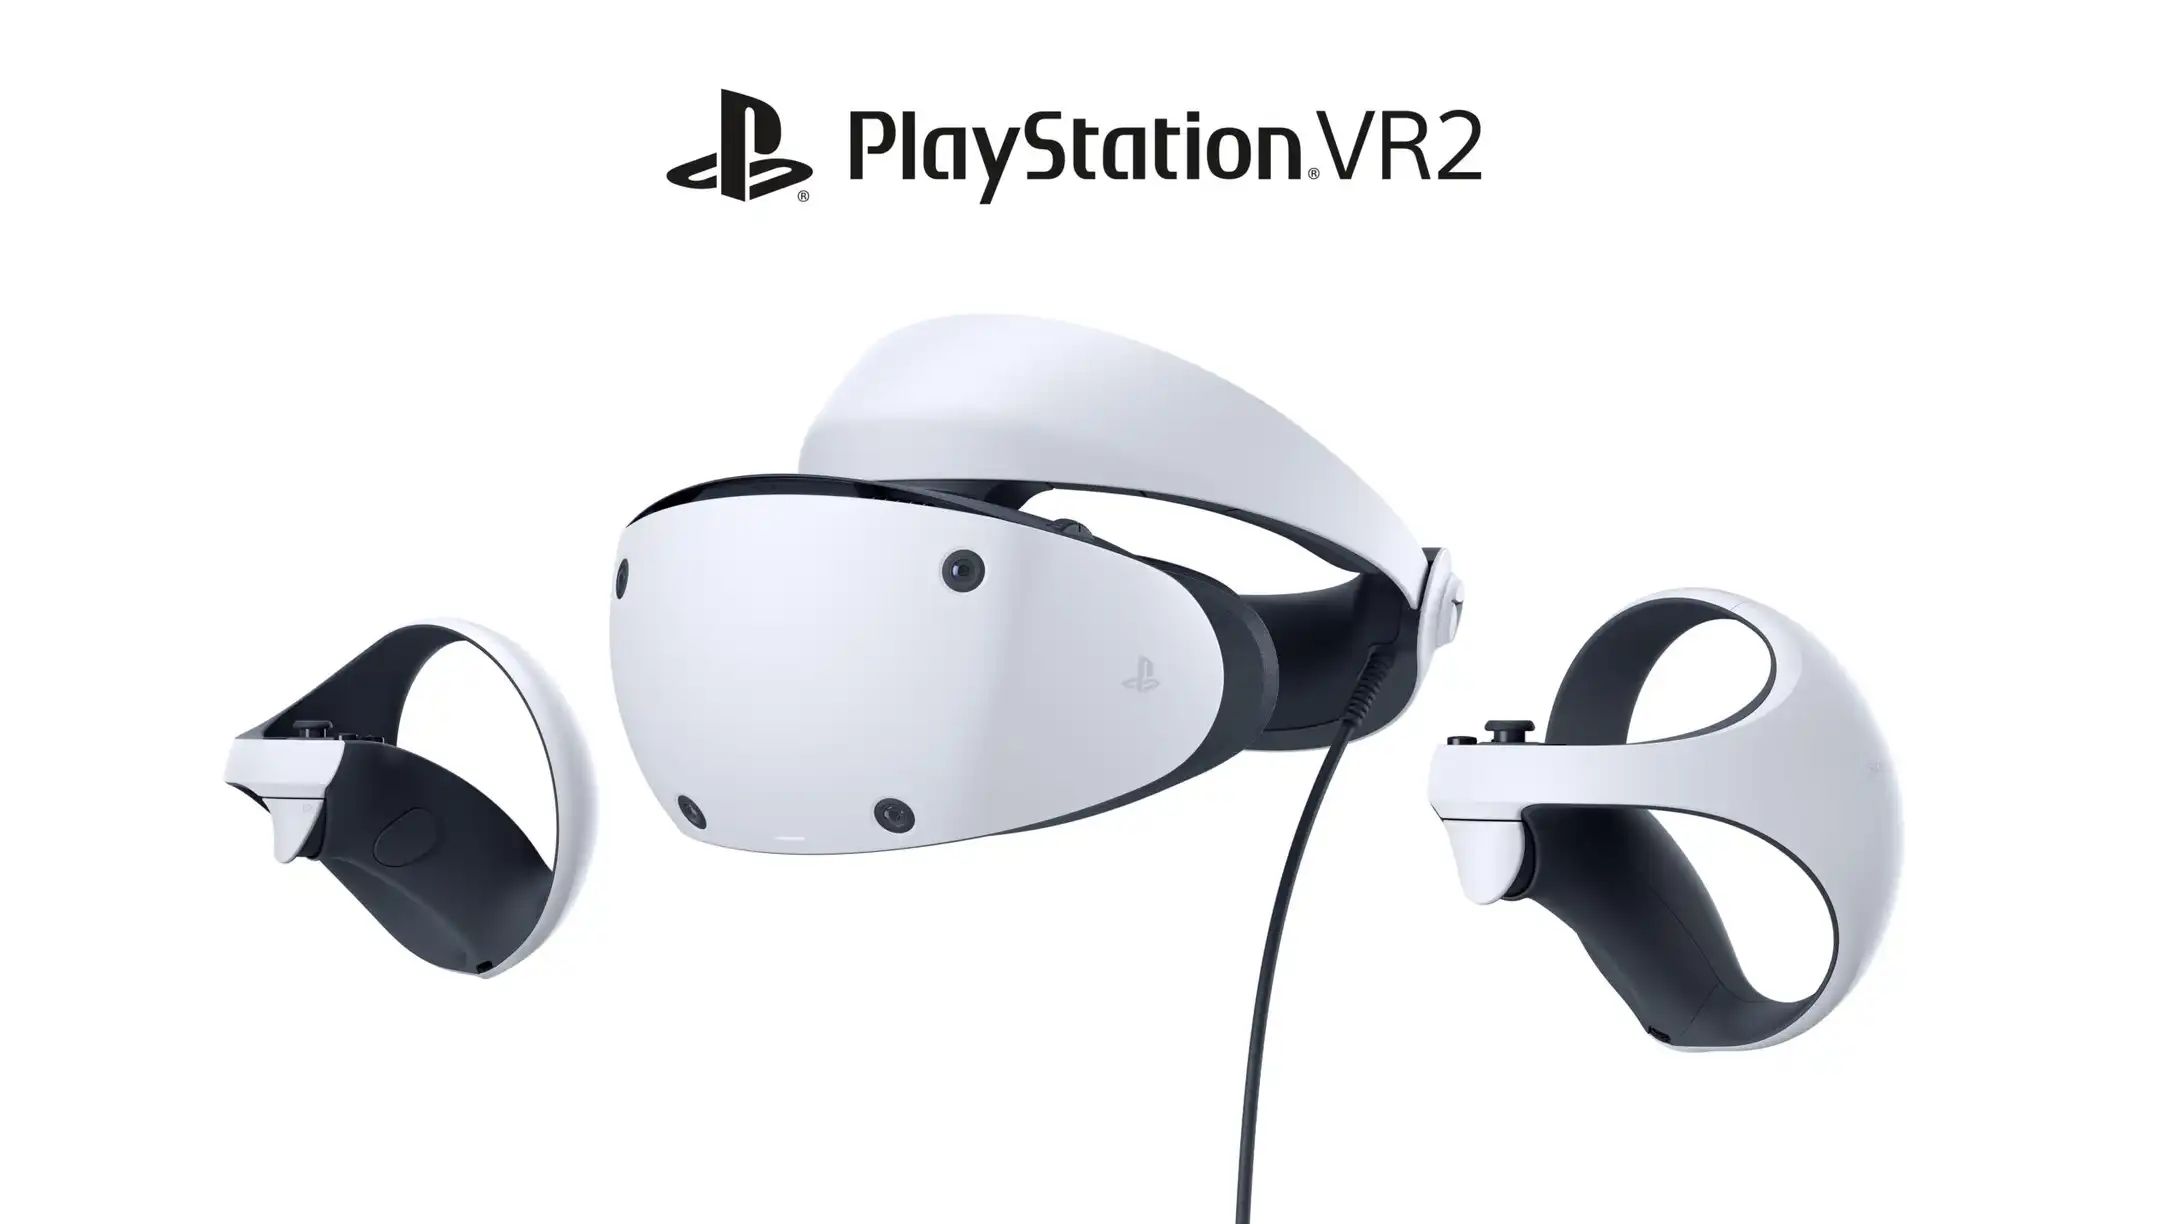 Image for Sony finally shows off its next-generation VR headset, PlayStation VR2